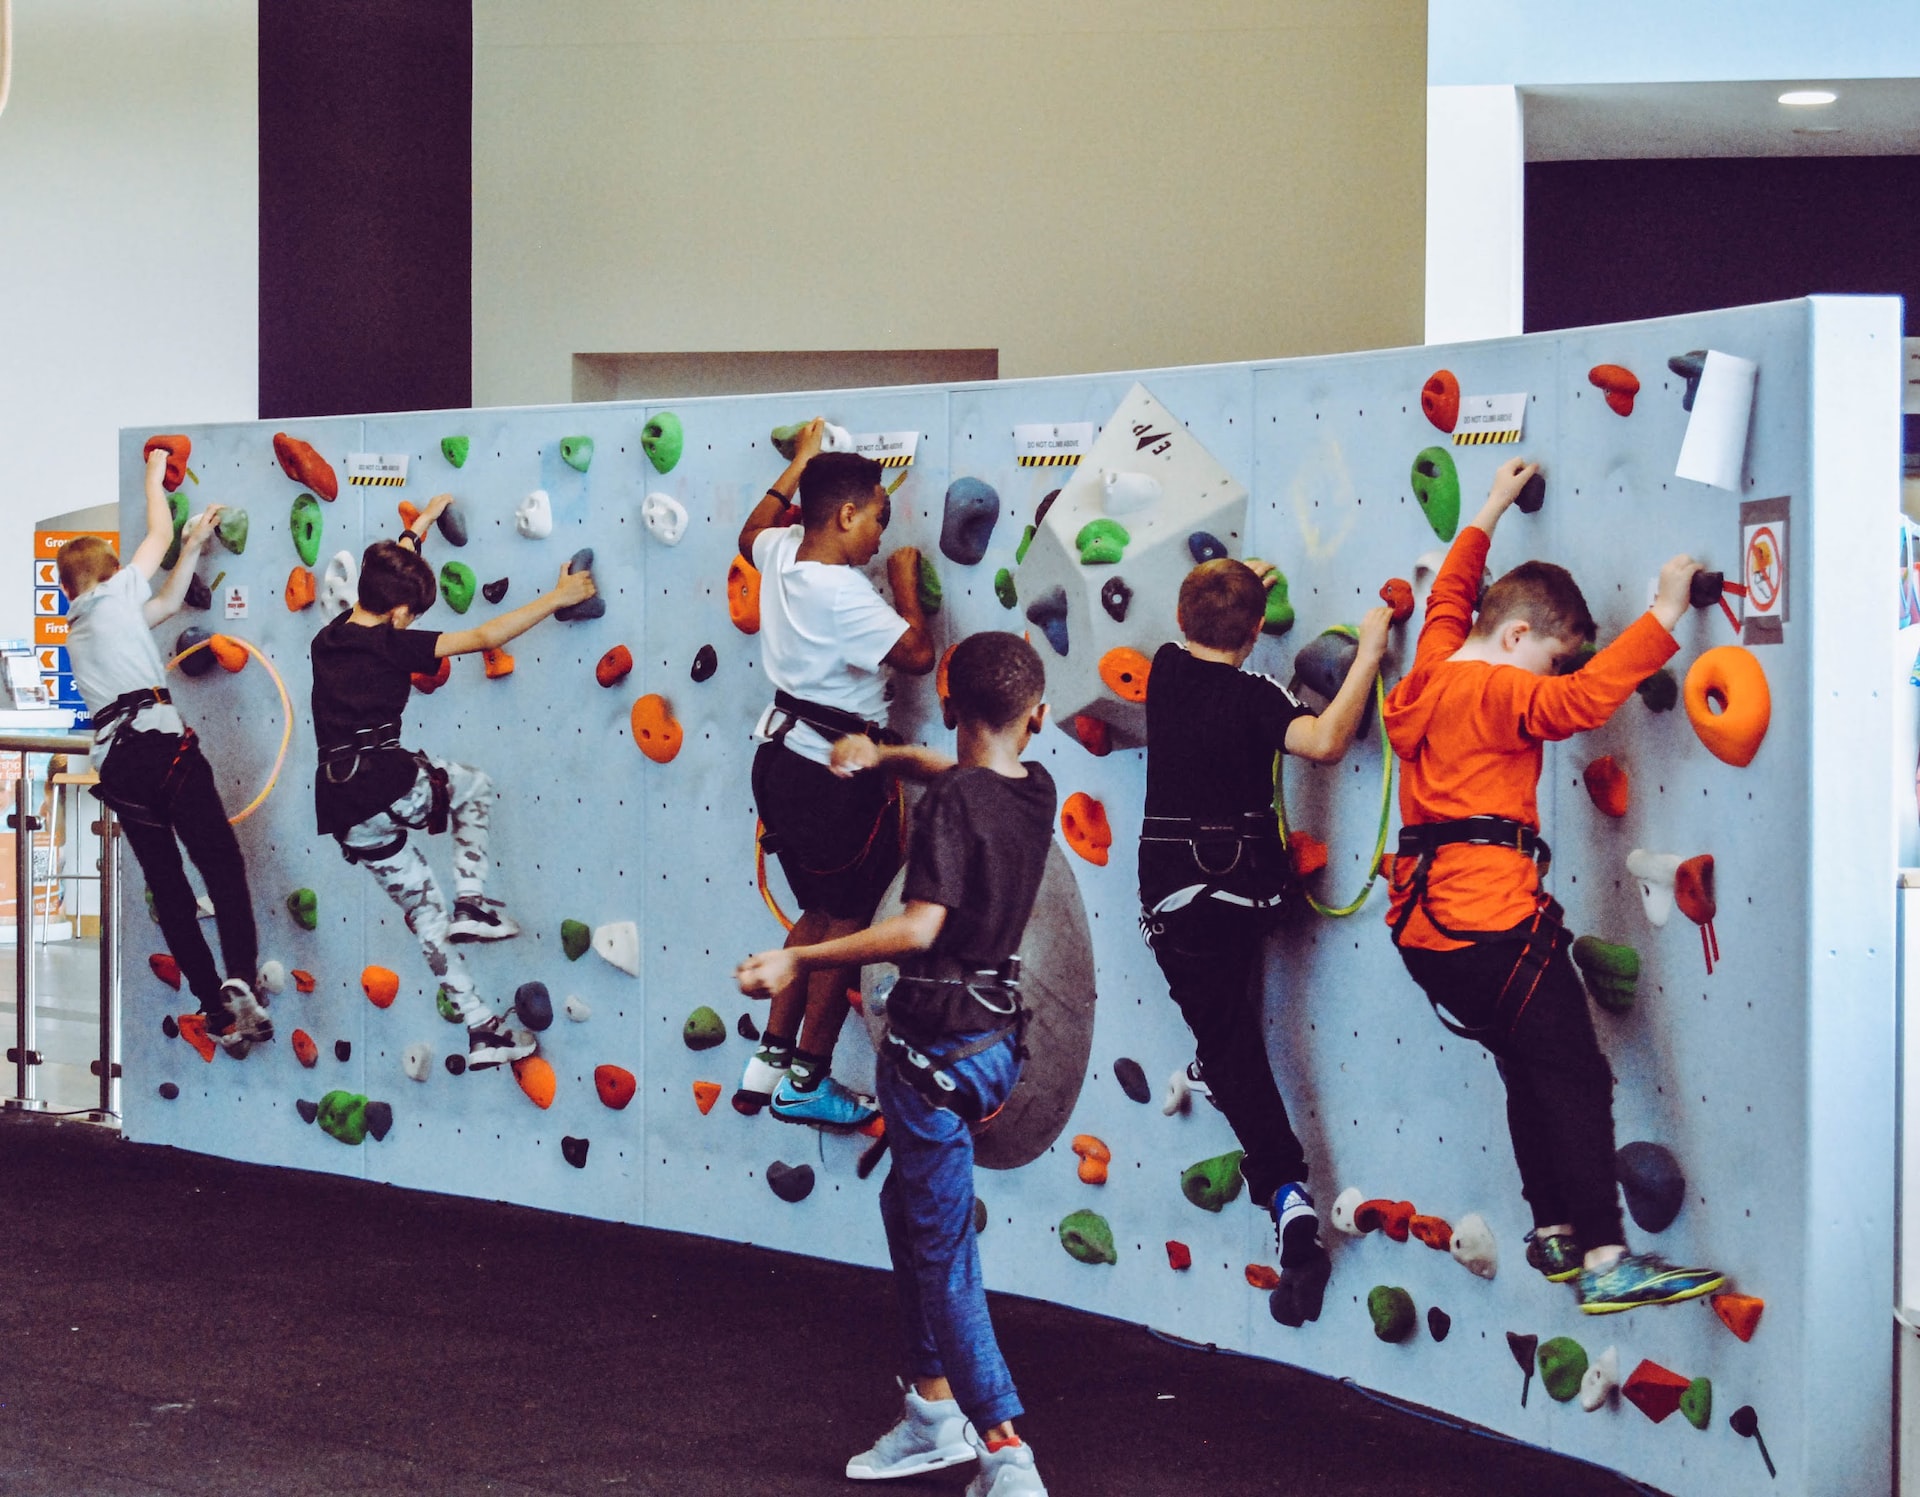 students on a climbing wall in a classroom